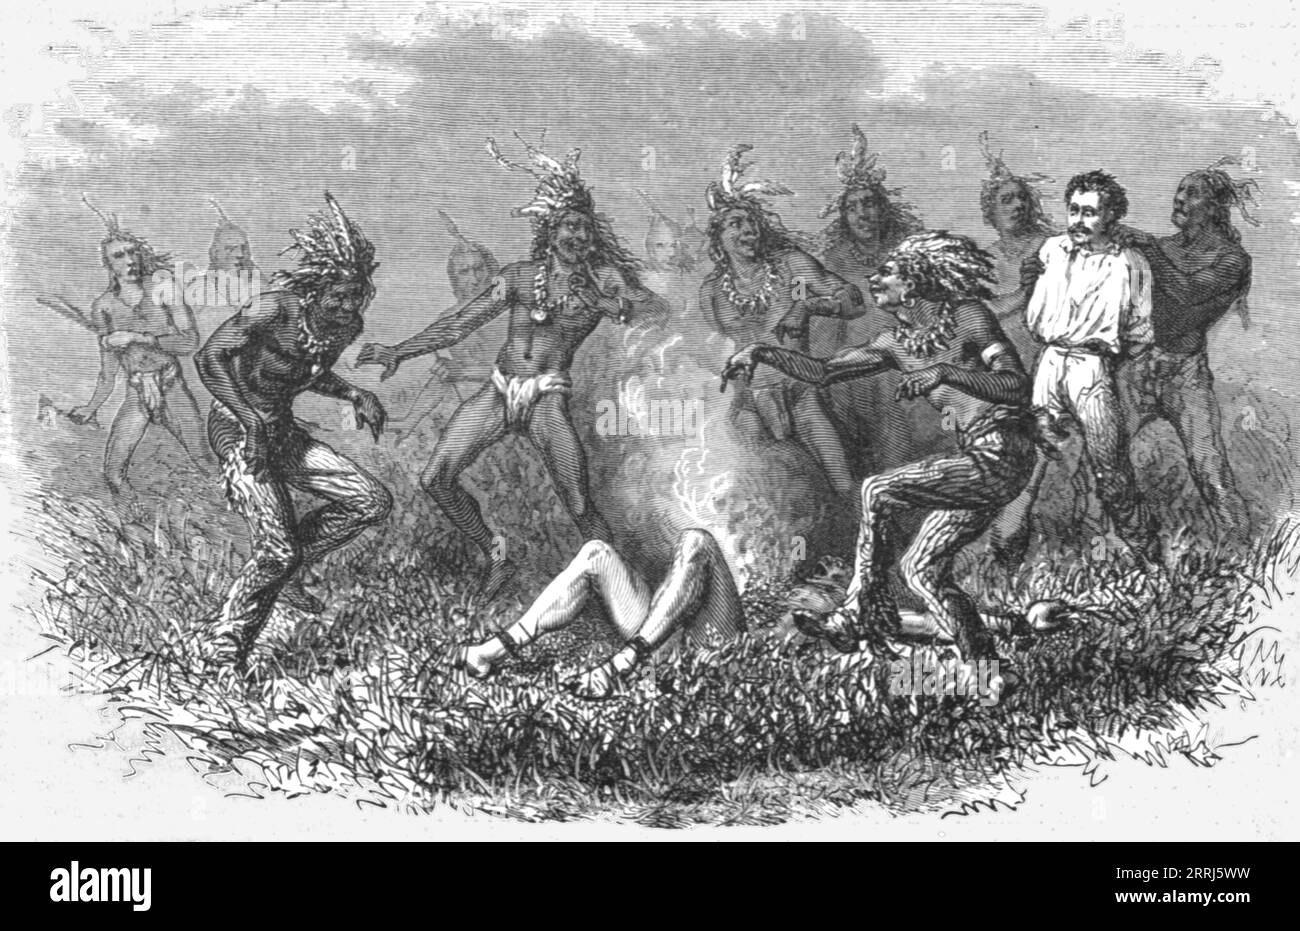 'Sioux Indians burning a prisoner; Ocean to Ocean, the Pacific railroad', 1875. From, 'Illustrated Travels' by H.W. Bates. [Cassell, Petter, and Galpin, c1880, London] Stock Photo